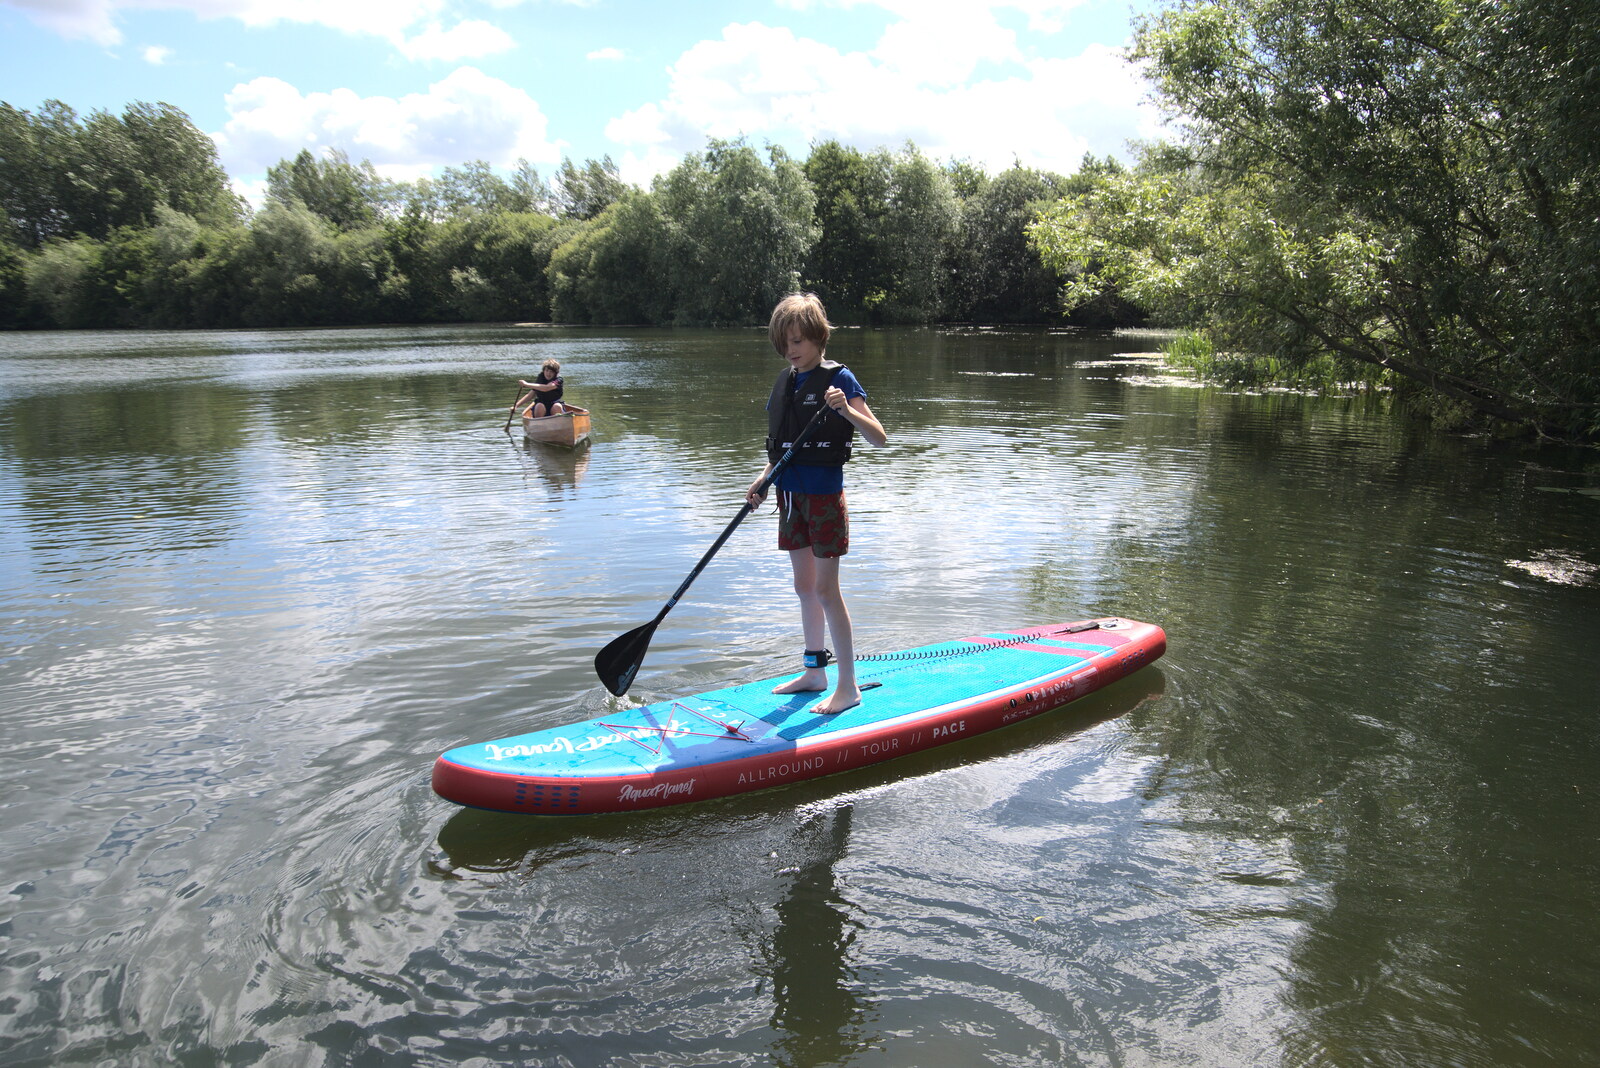 Harry does some stand-up paddle boarding from Camping at the Lake, Weybread, Harleston - 25th June 2022